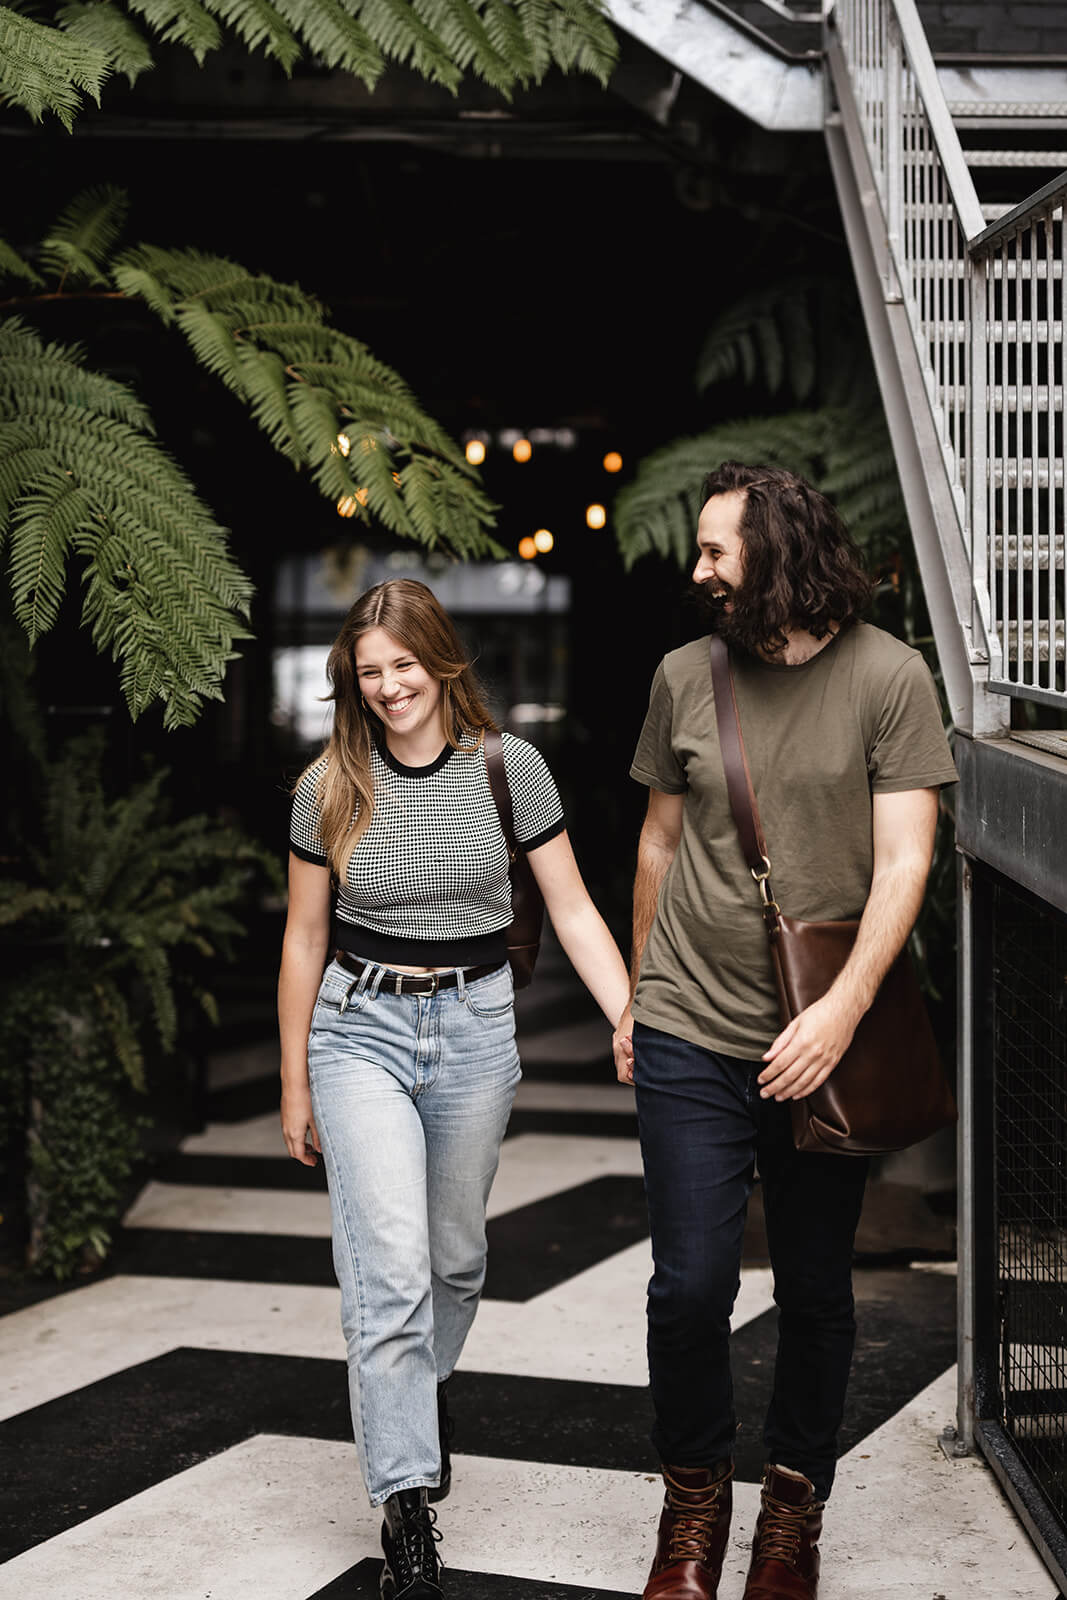 Heterosexual couple hand in hand walking towards camera and laughing. Black and white zig zag floor, ferns above. Woman is wearing black and white top and light jeans. Man is wearing green tshirt, dark jeans and brown leather boots and crossbody brown leather bag